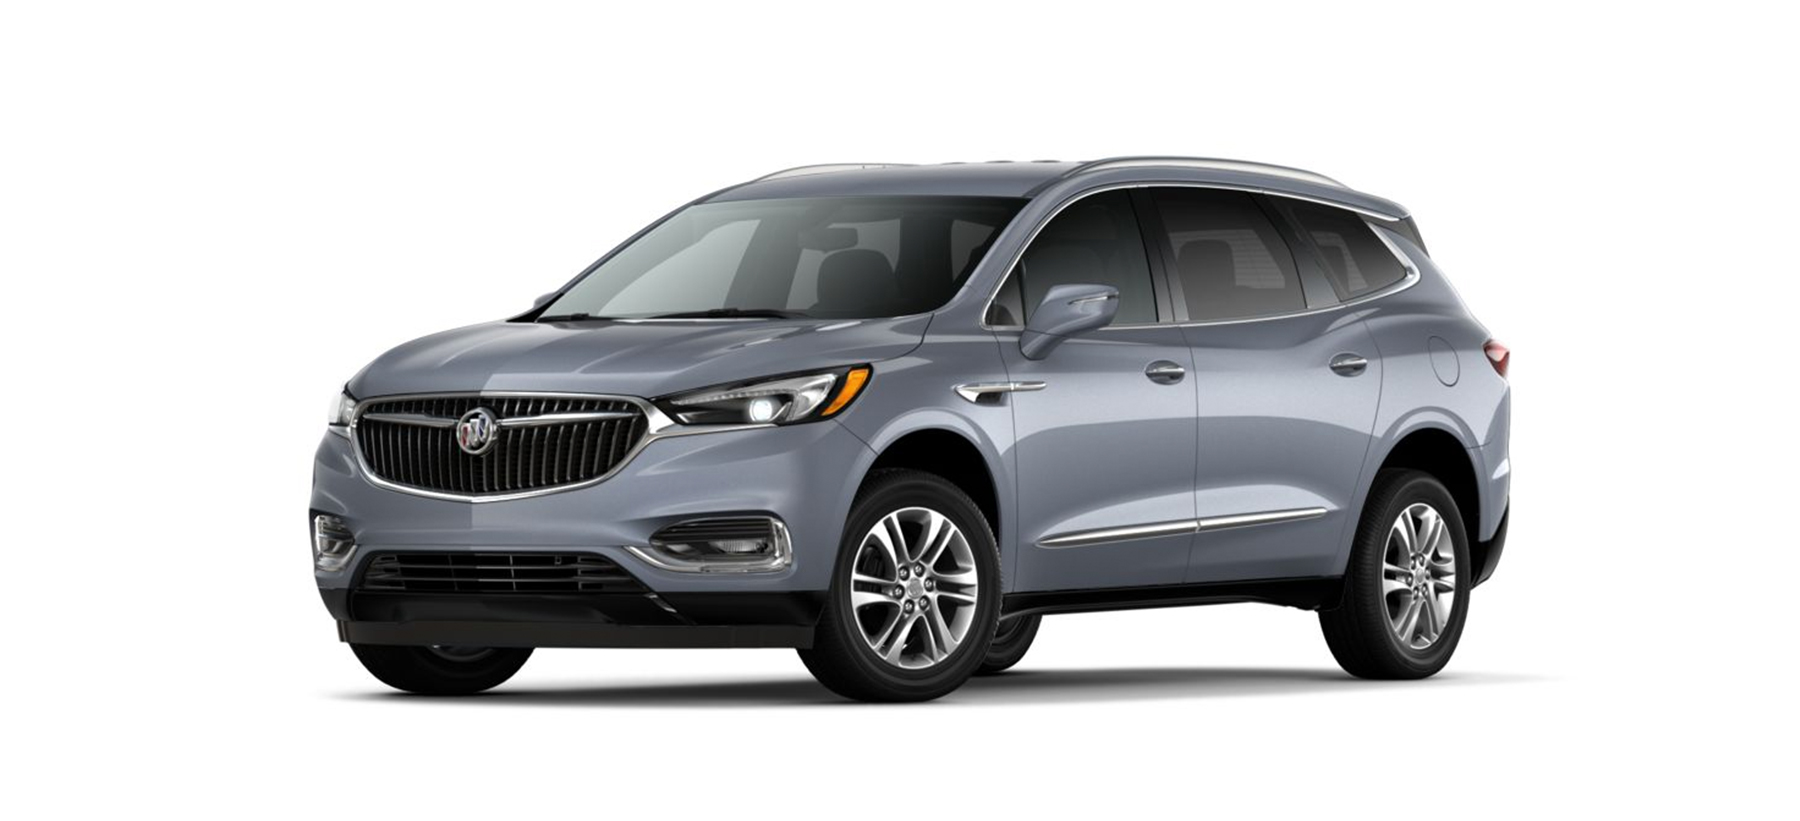 Buick Enclave in Grants Pass | Josephine County 2020 Buick Enclave Dealer |  Buick Dealership serving Medford, Roseburg & Brookings